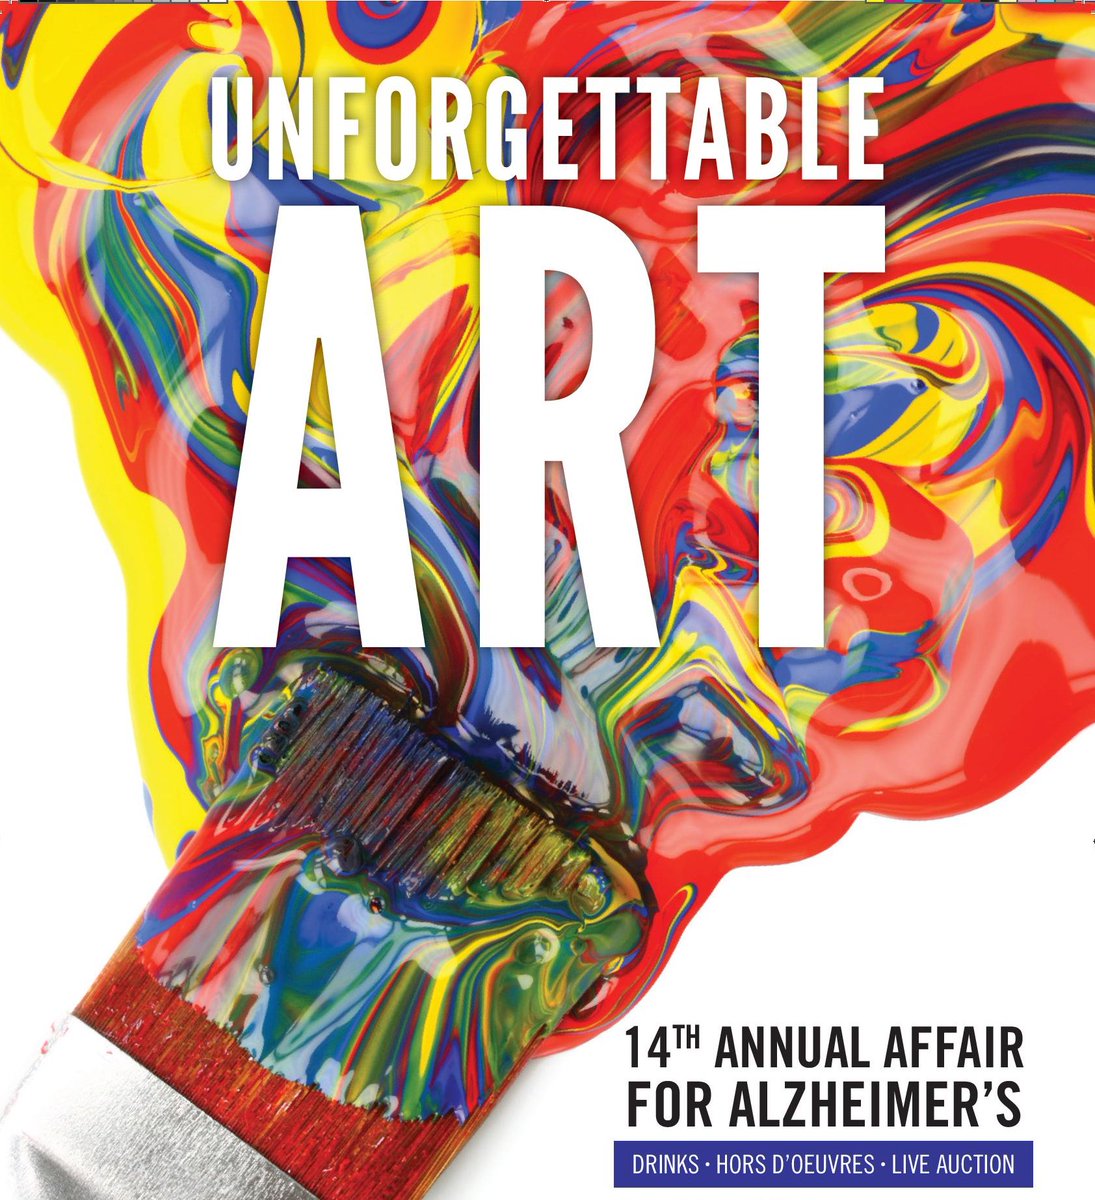 We're now accepting arist applications for our 2017 Unforgattable Art event on April 29! Sign up deadline is Feb 10! unforgettableart.org/artists.asp